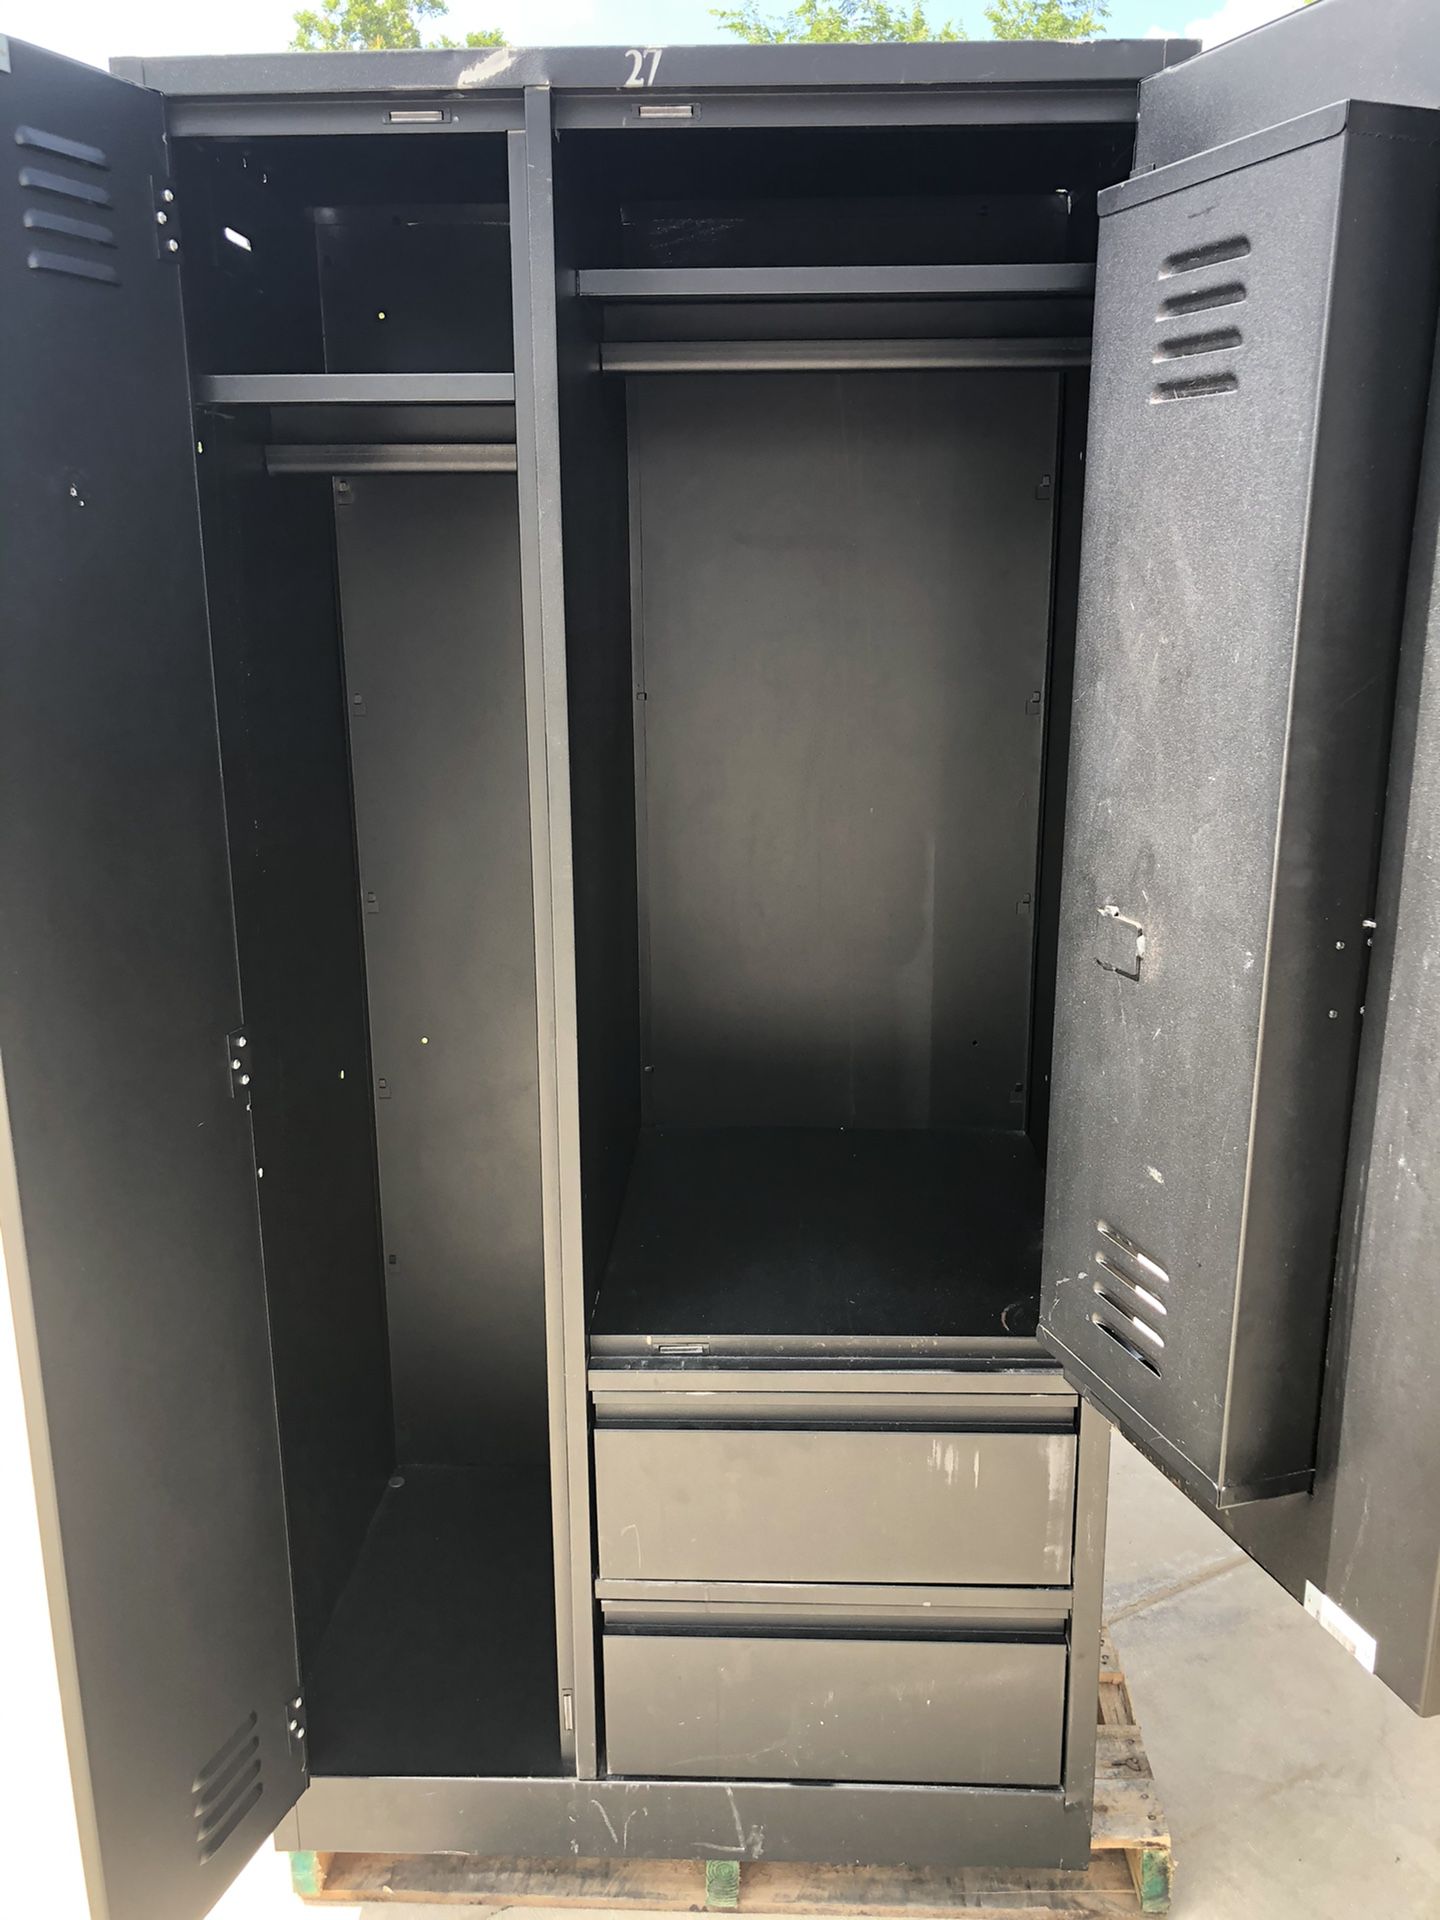 MILITARY WALL LOCKERS for Sale in Converse, TX - OfferUp